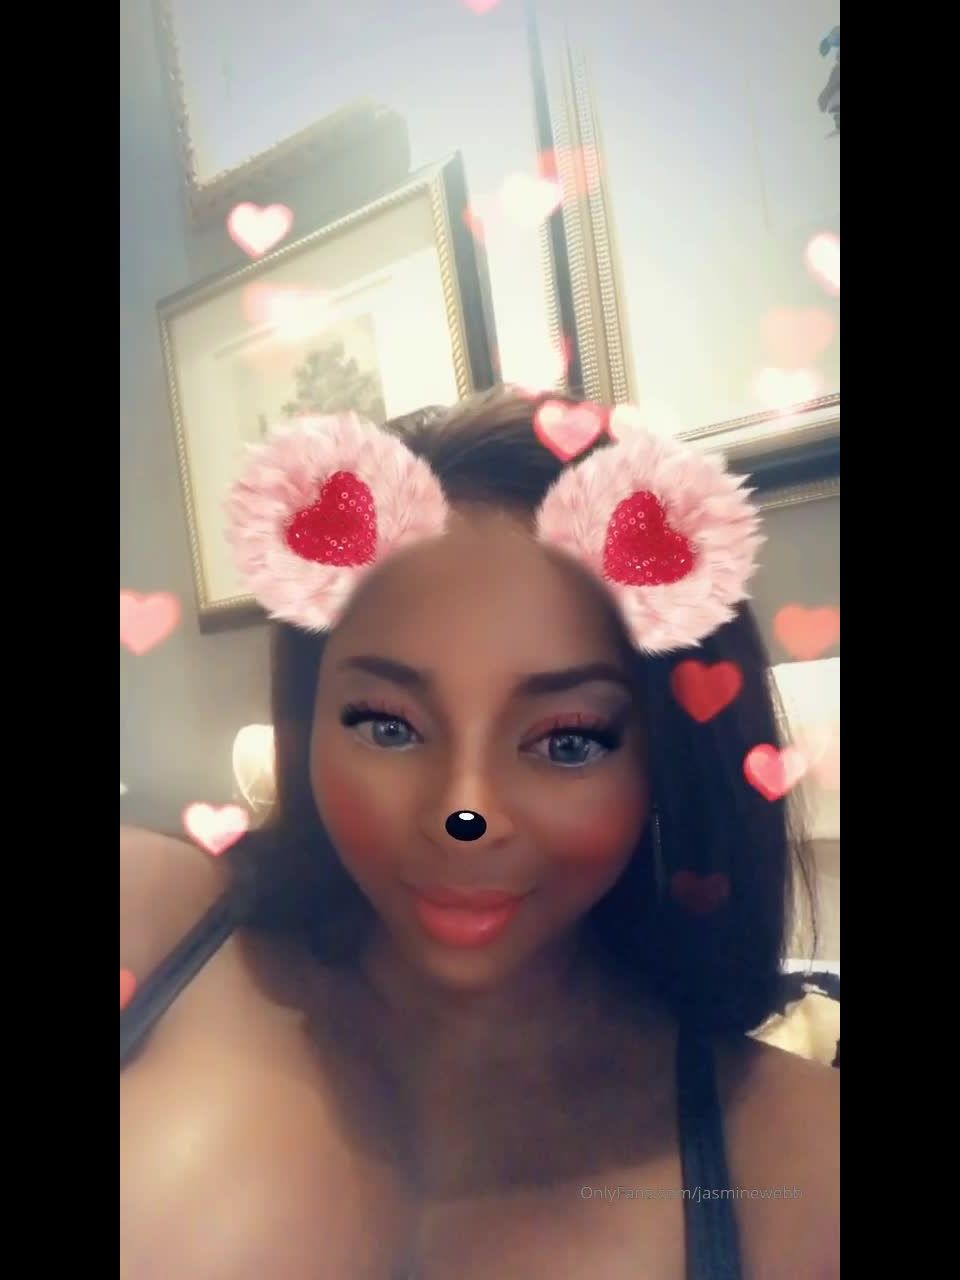 Onlyfans - Jasmine Webb - jasminewebbYes I walk around the house acting sexy all day come get silly with me  we can be sup - 08-02-2020